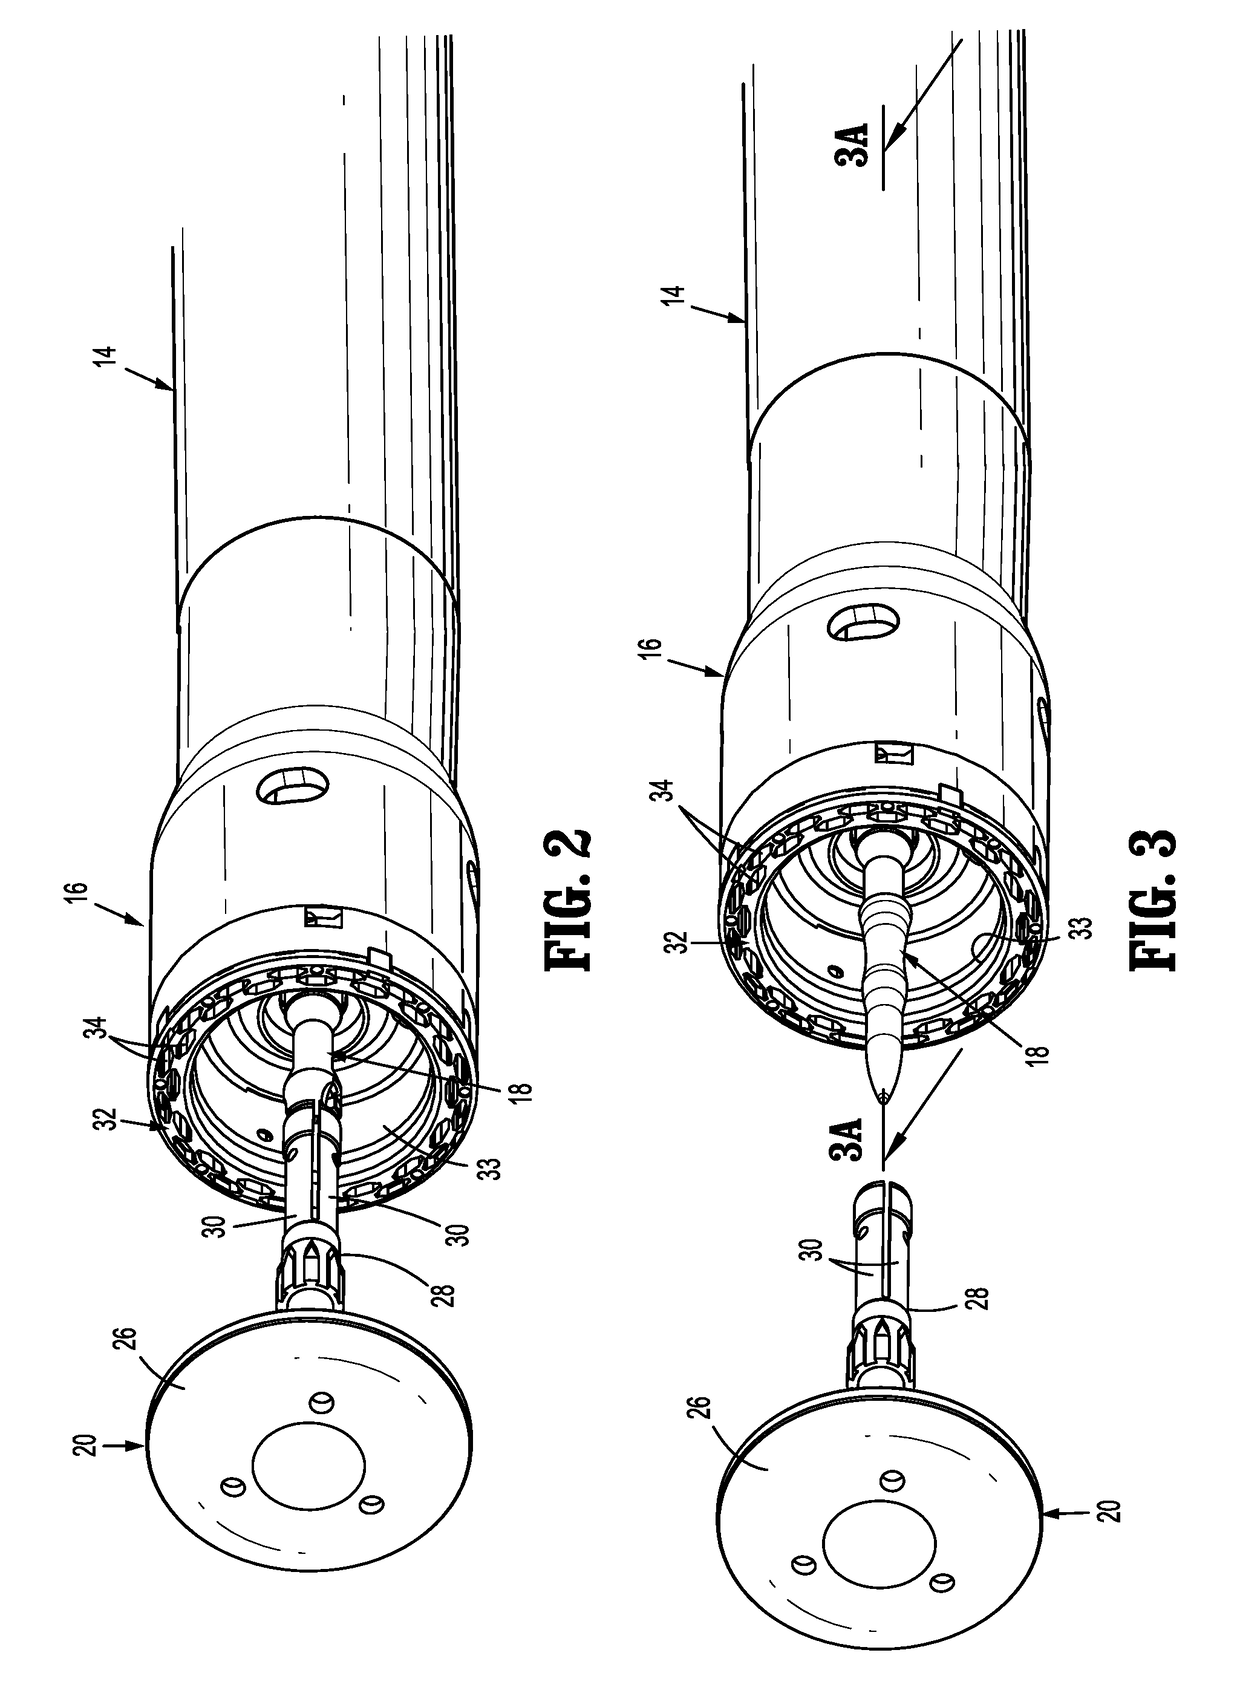 Circular stapling device with articulating anvil retainer assembly